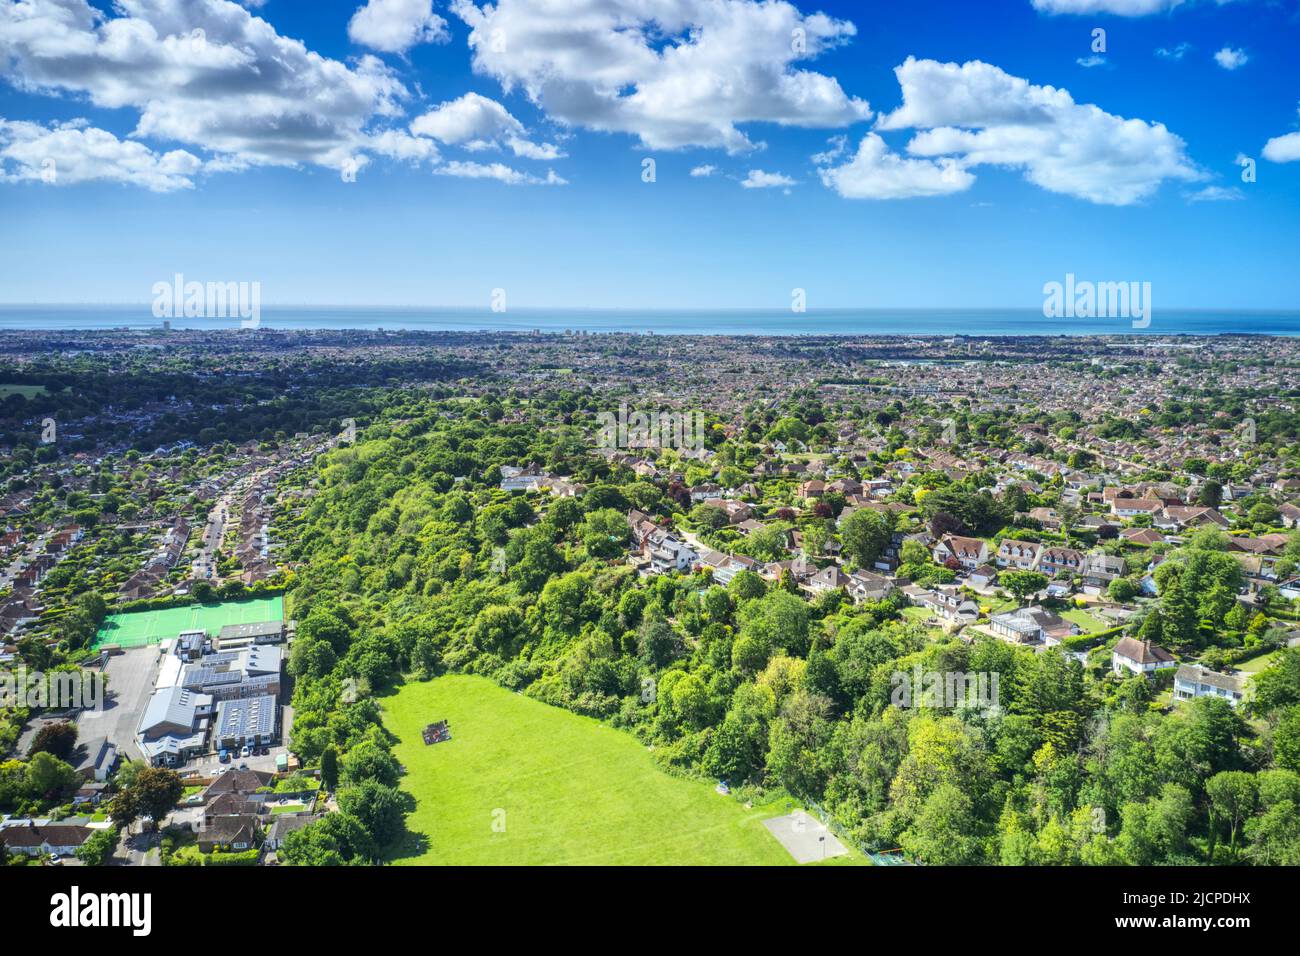 High Salvington set in the foothills of the South Downs with magnificent views over Worthing and along the the South coast of England in West Sussex, Stock Photo